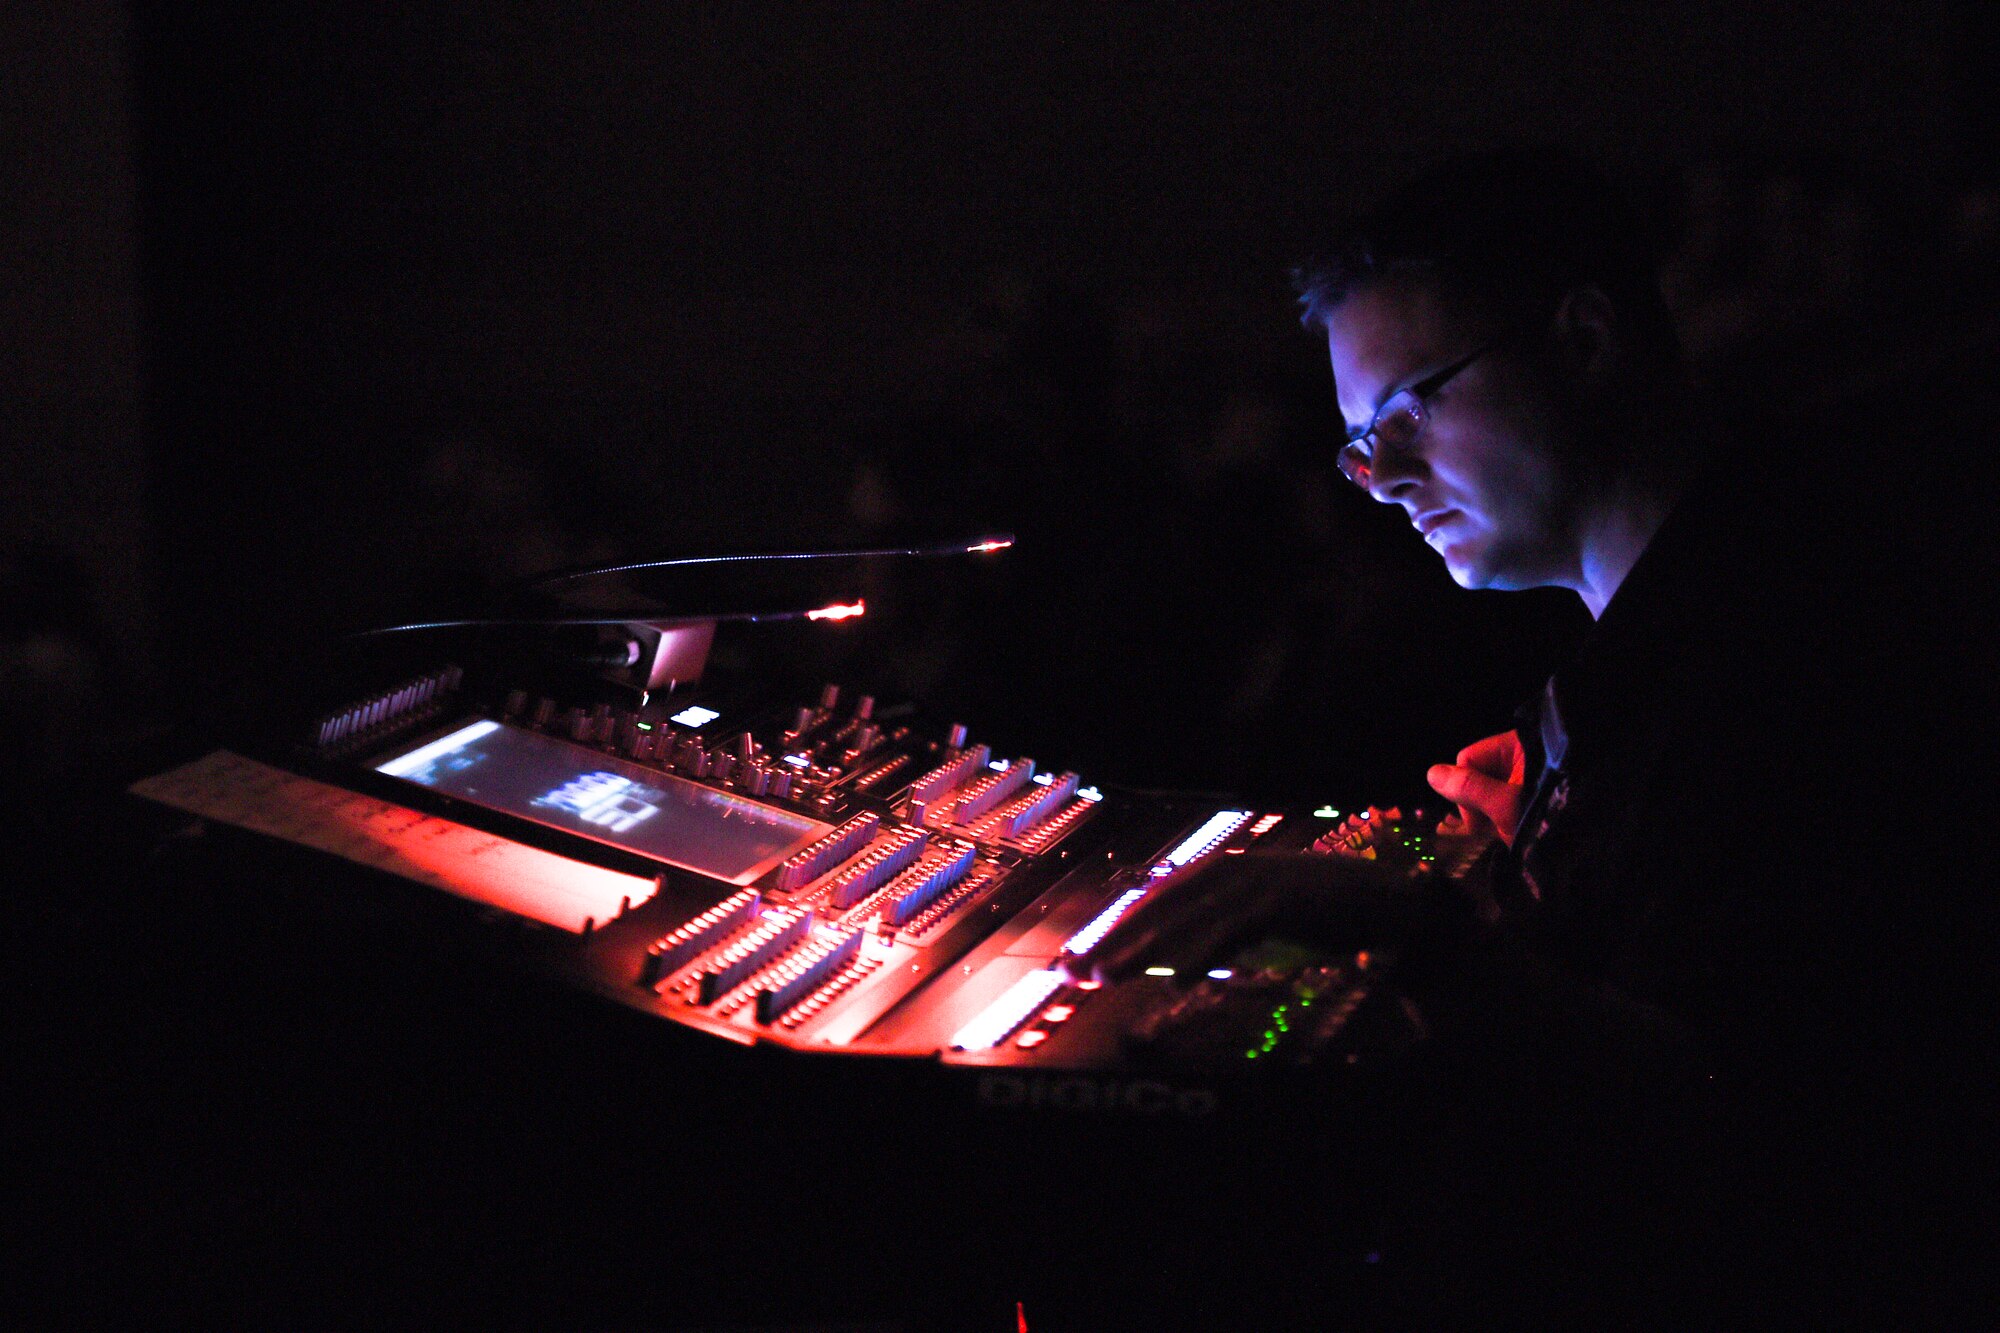 Senior Master Sgt. Adam Dempsey, United States Air Force Band’s Celtic Aire sound engineer, operates a soundboard during a performance at the Cultural Activities Center in Temple, Texas, March 8, 2016. This show was part of a North Texas tour from March 4 – 12. (U.S. Air Force photo by Senior Airman Ryan J. Sonnier/RELEASED)